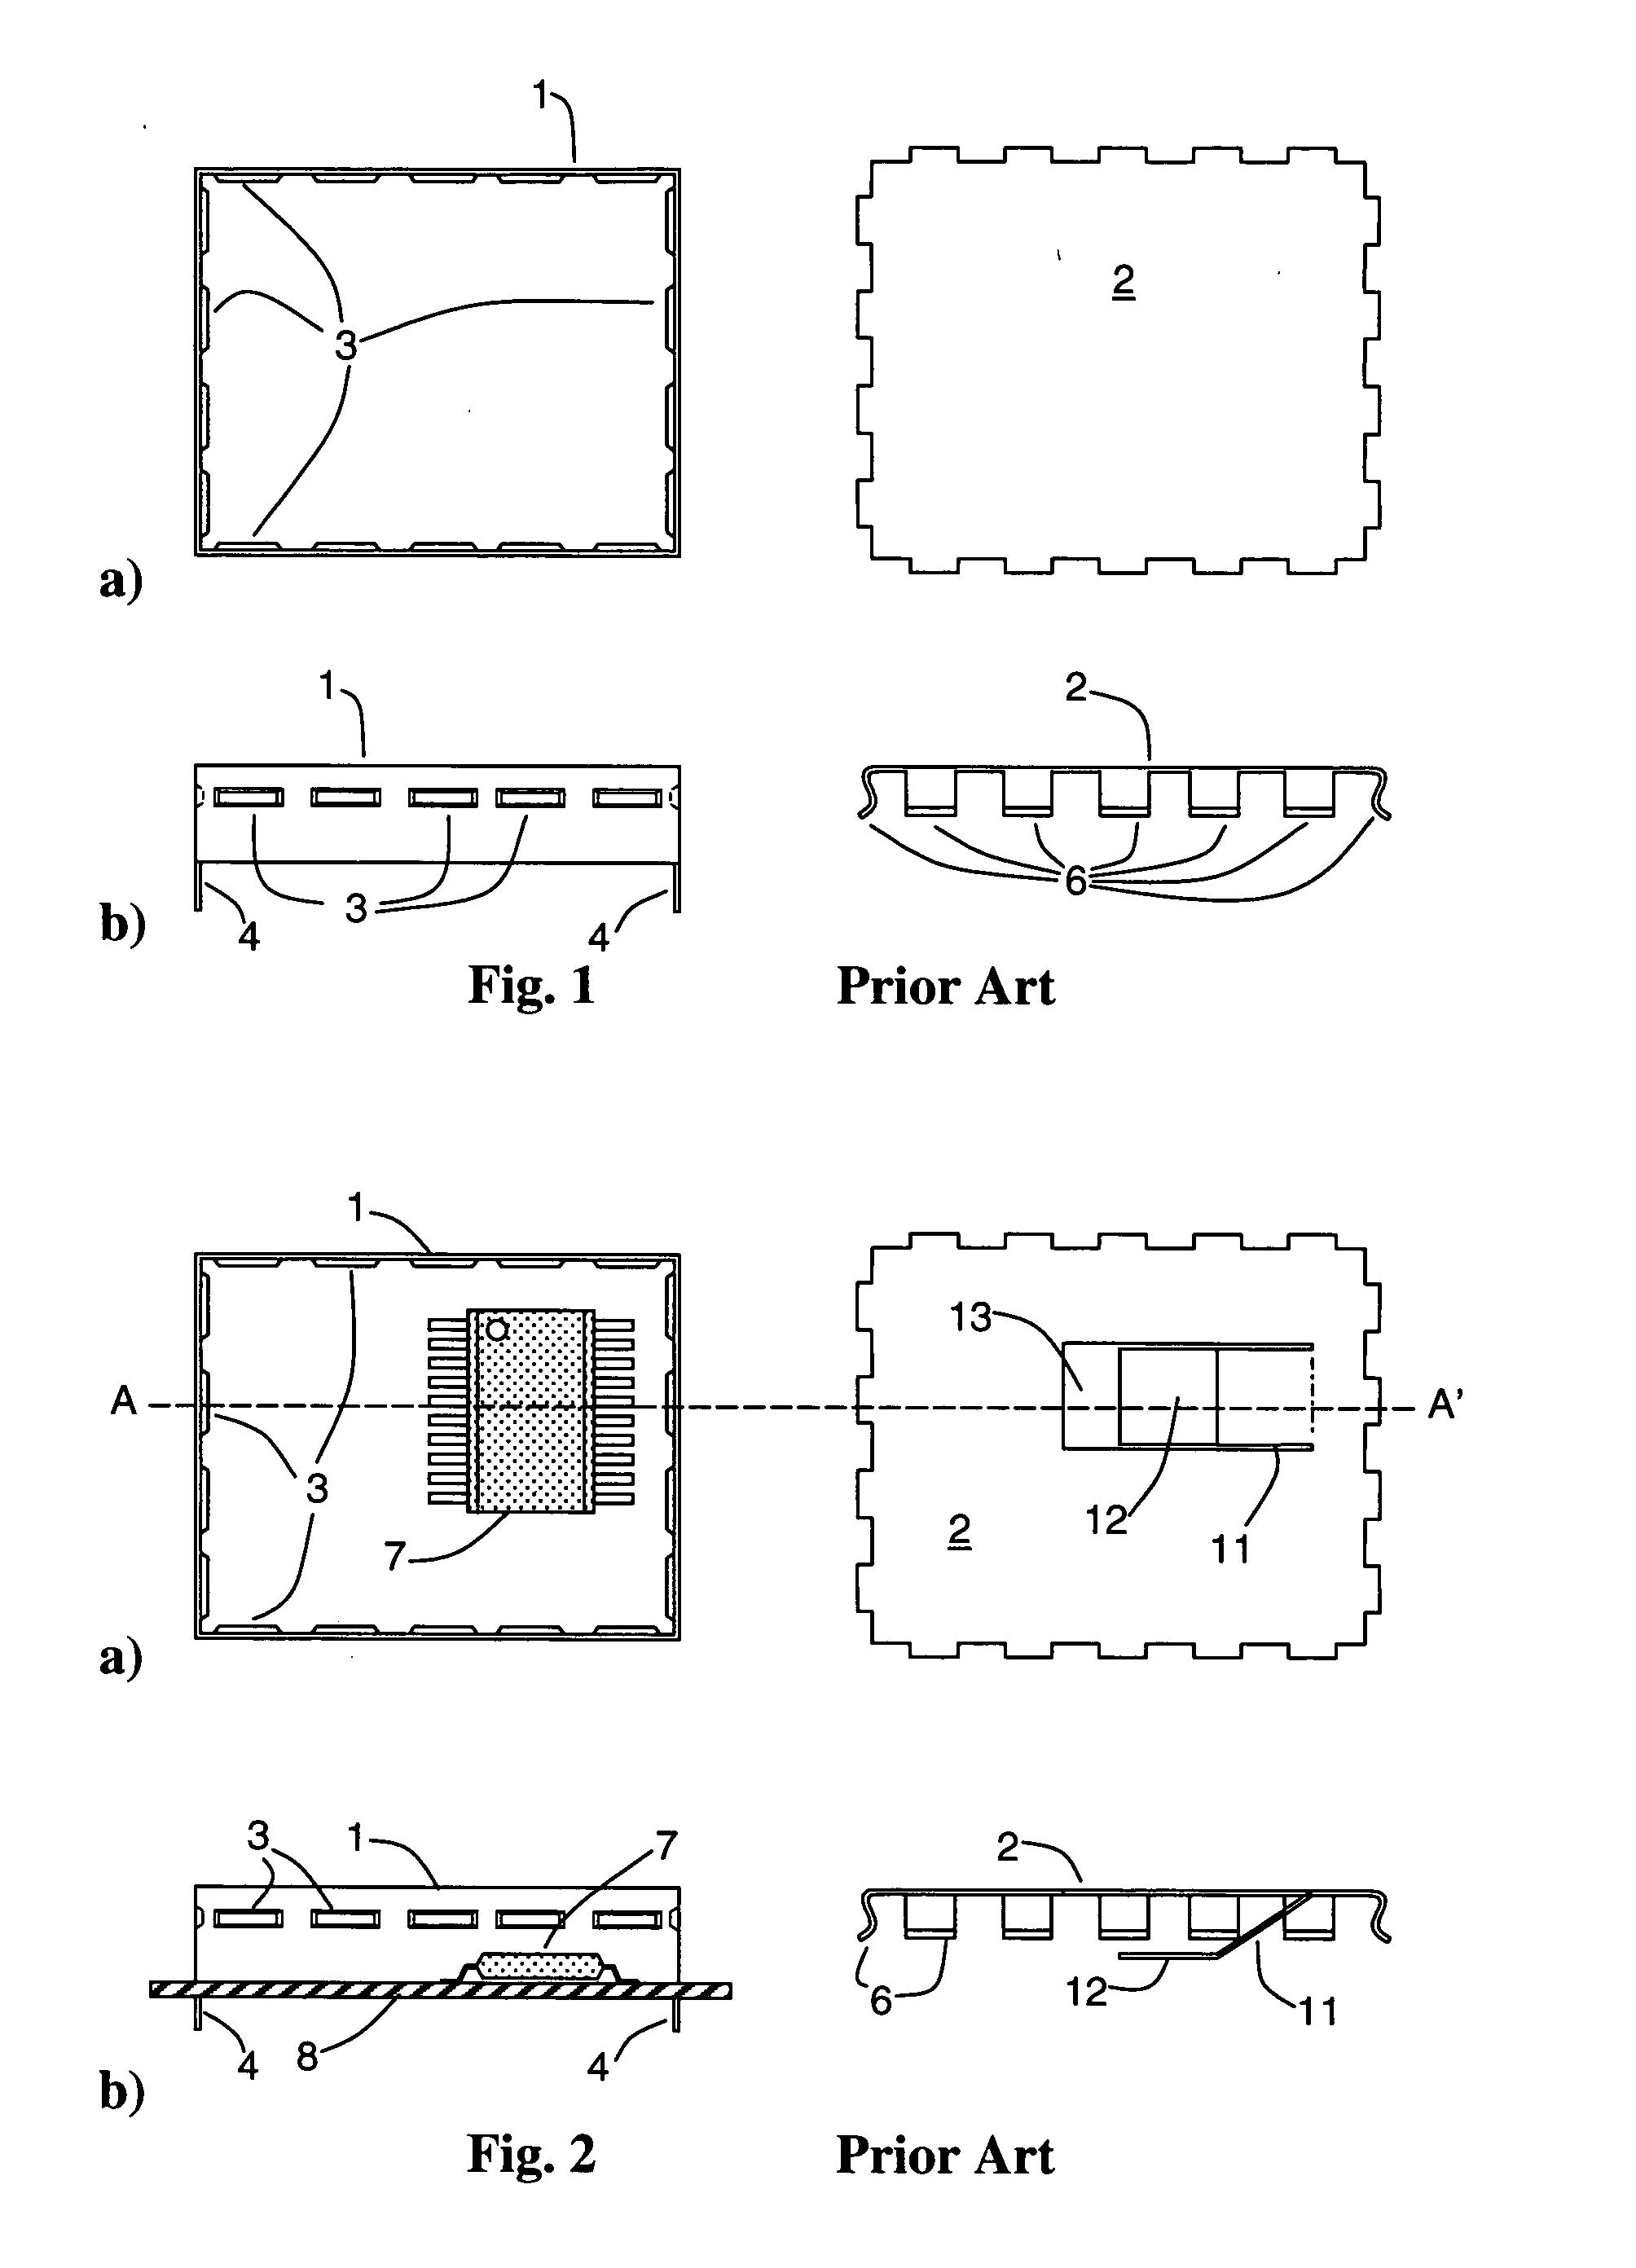 Shield casing with heat sink for electric circuits